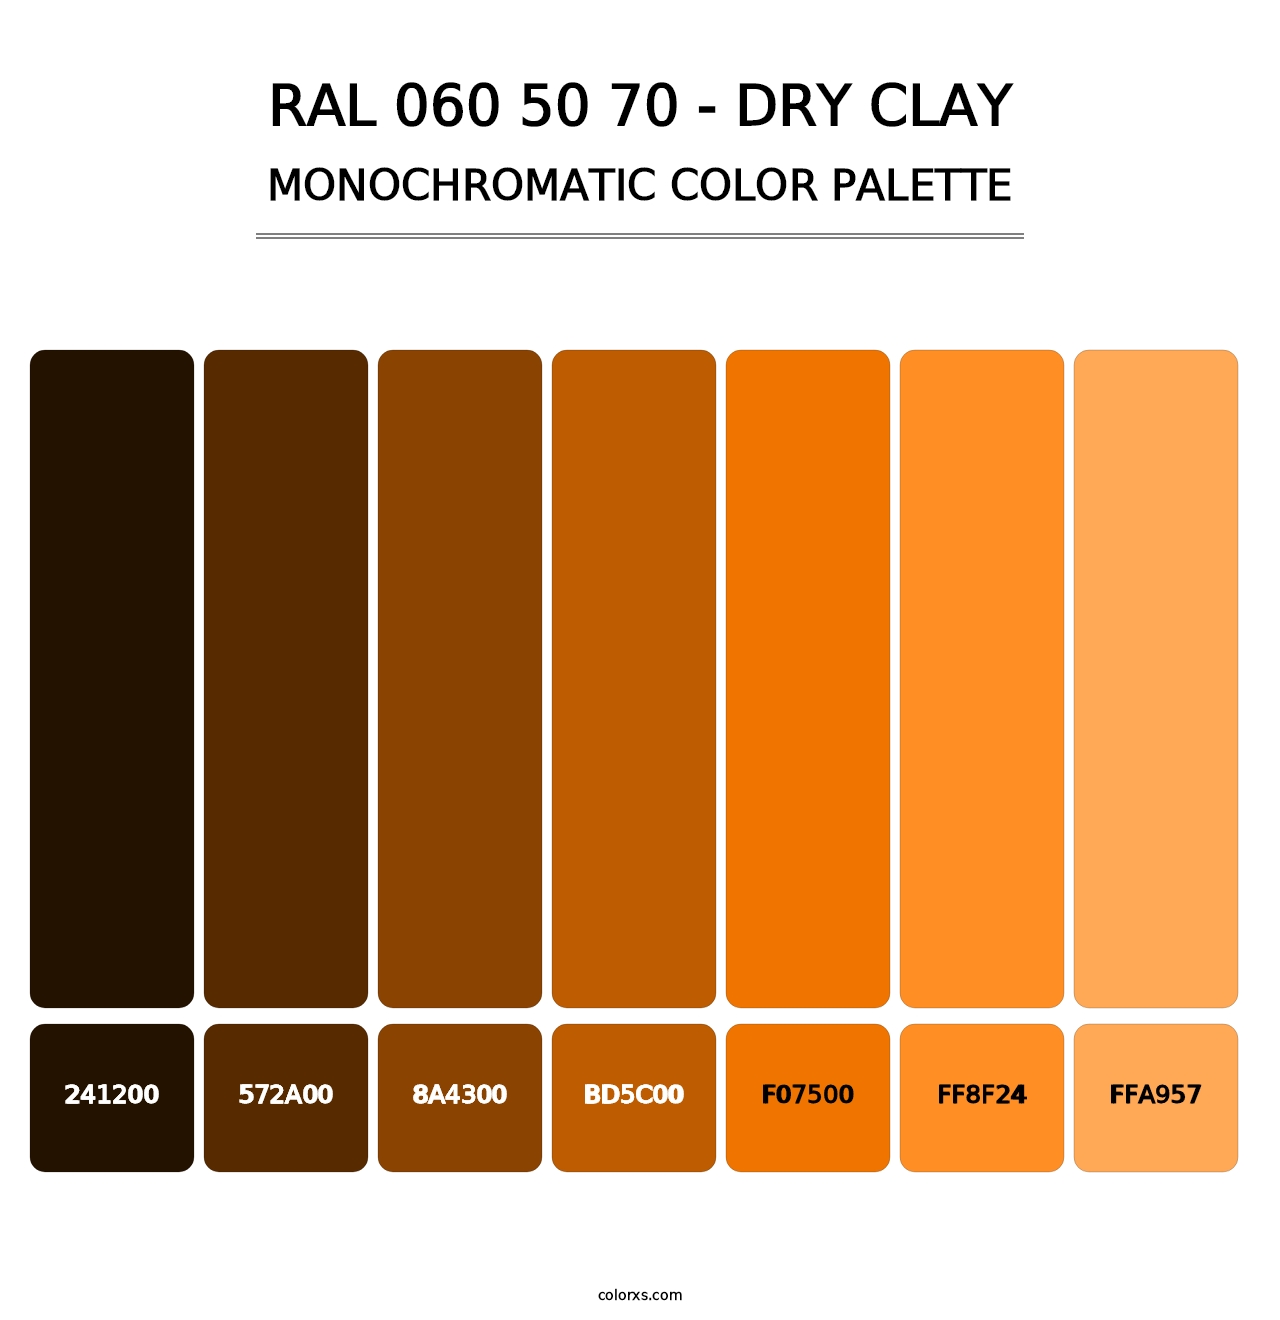 RAL 060 50 70 - Dry Clay - Monochromatic Color Palette